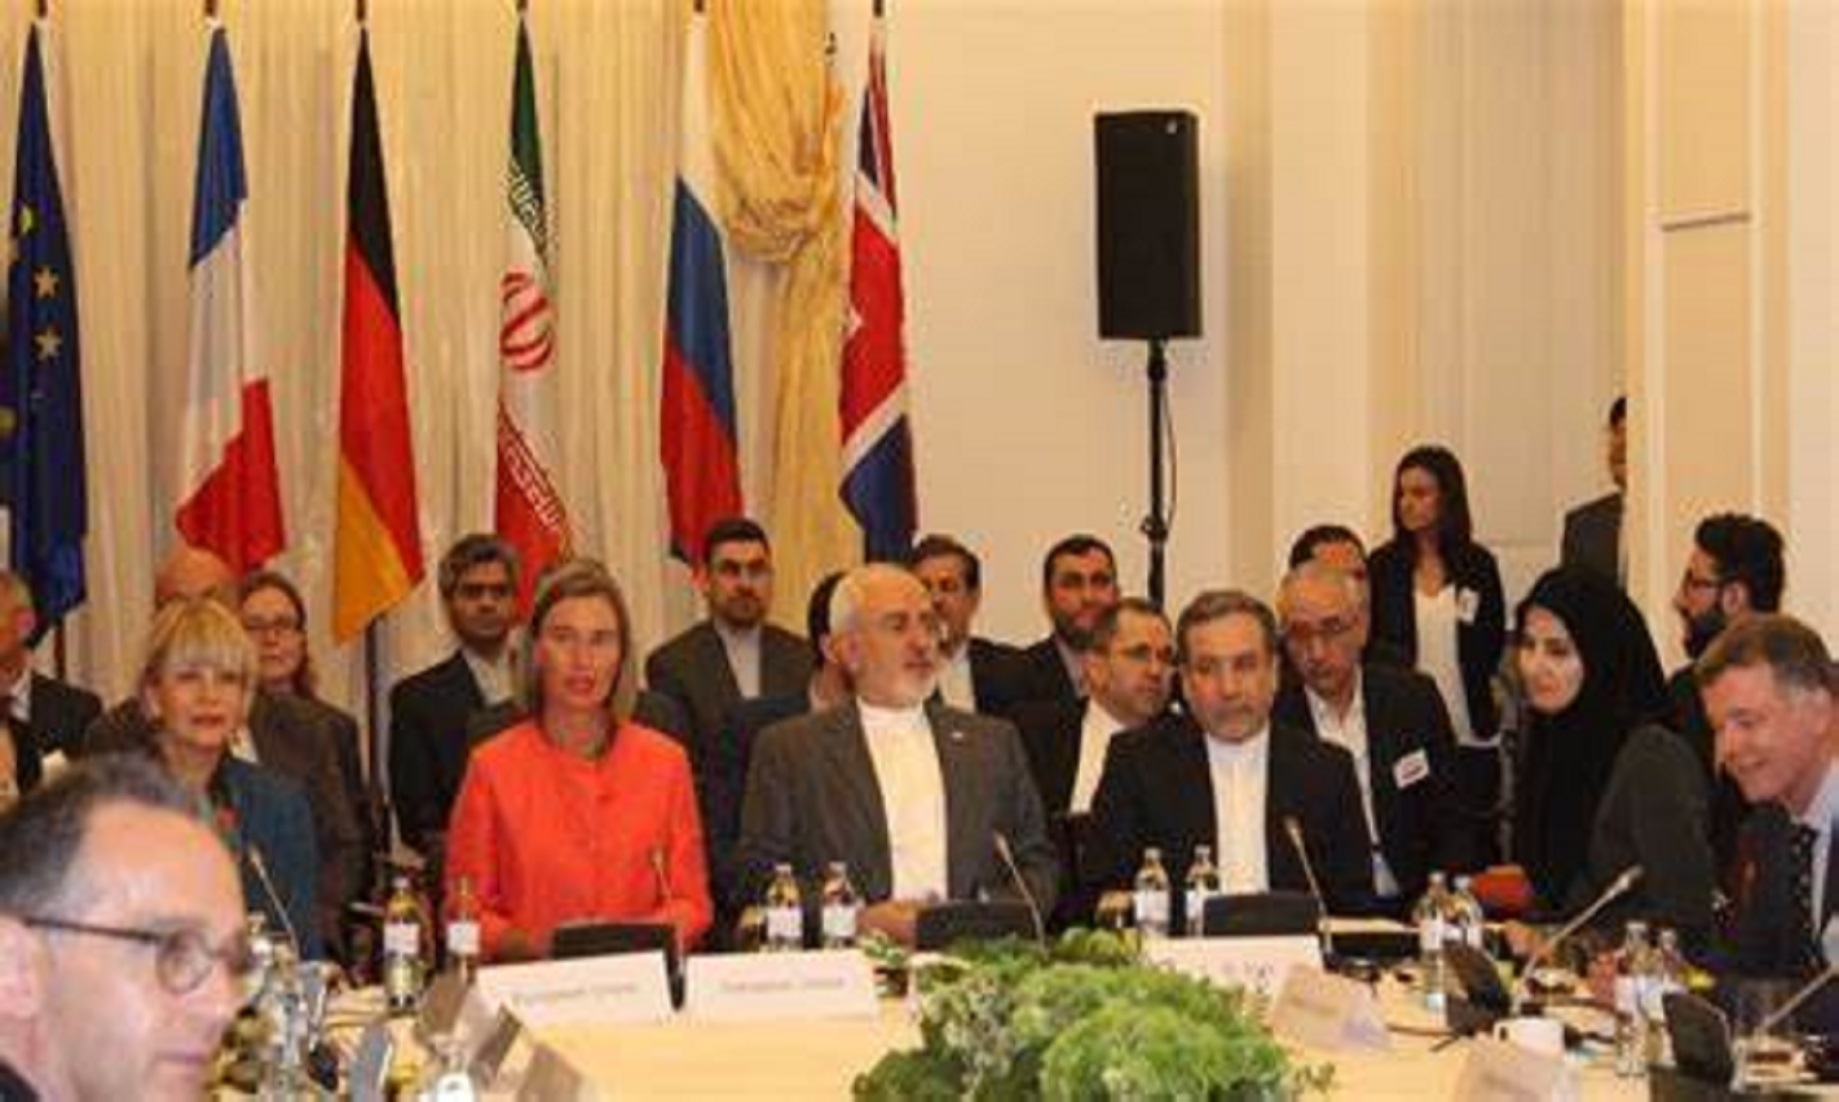 Relevant Parties Reaffirm Commitment To Iran Nuclear Deal Despite Challenges